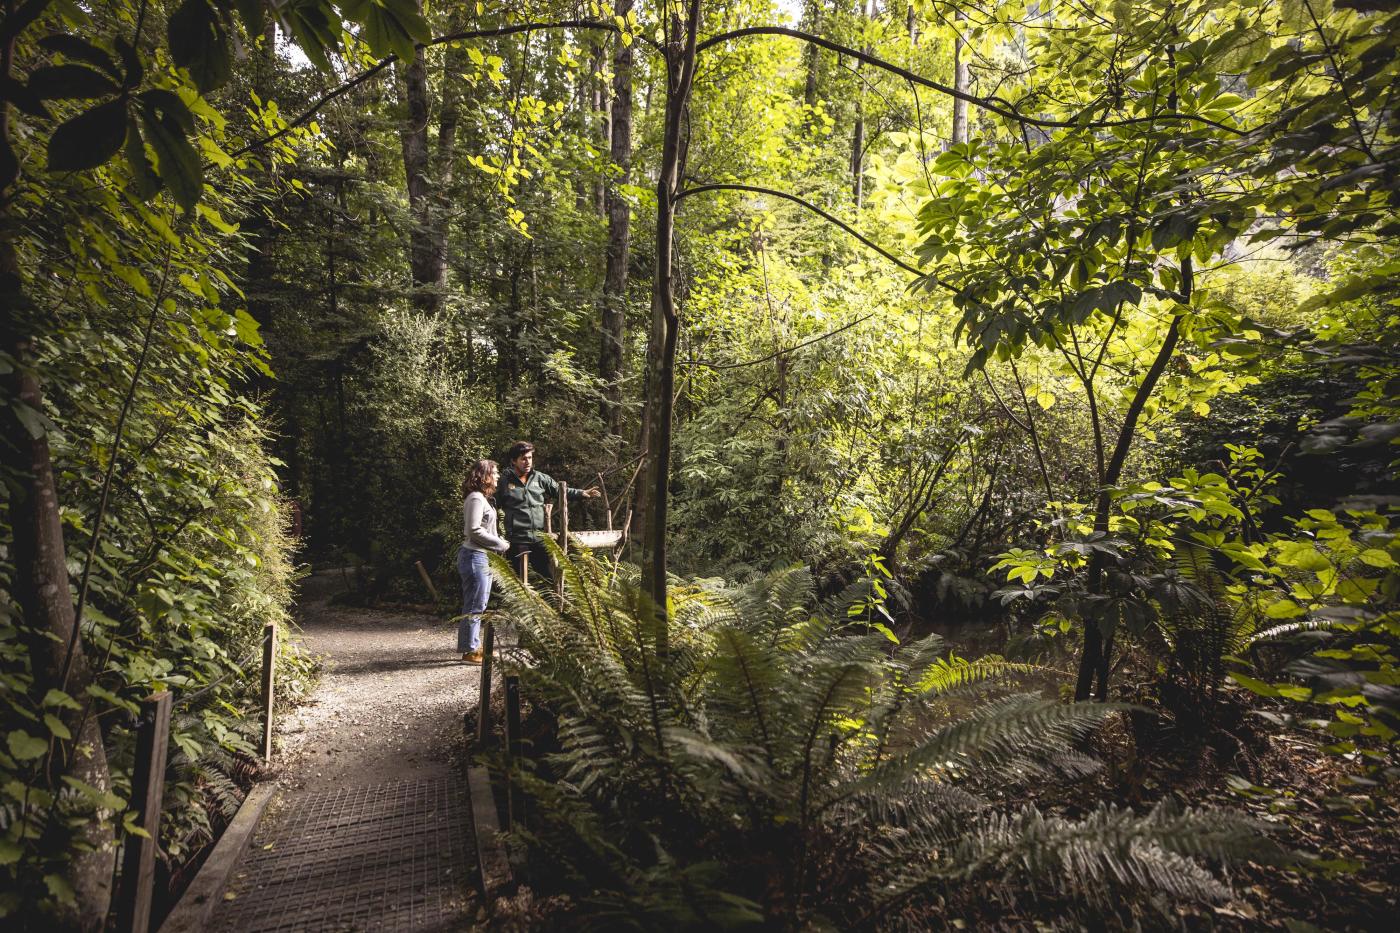 Two people surrounded by native bush at the kiwi park